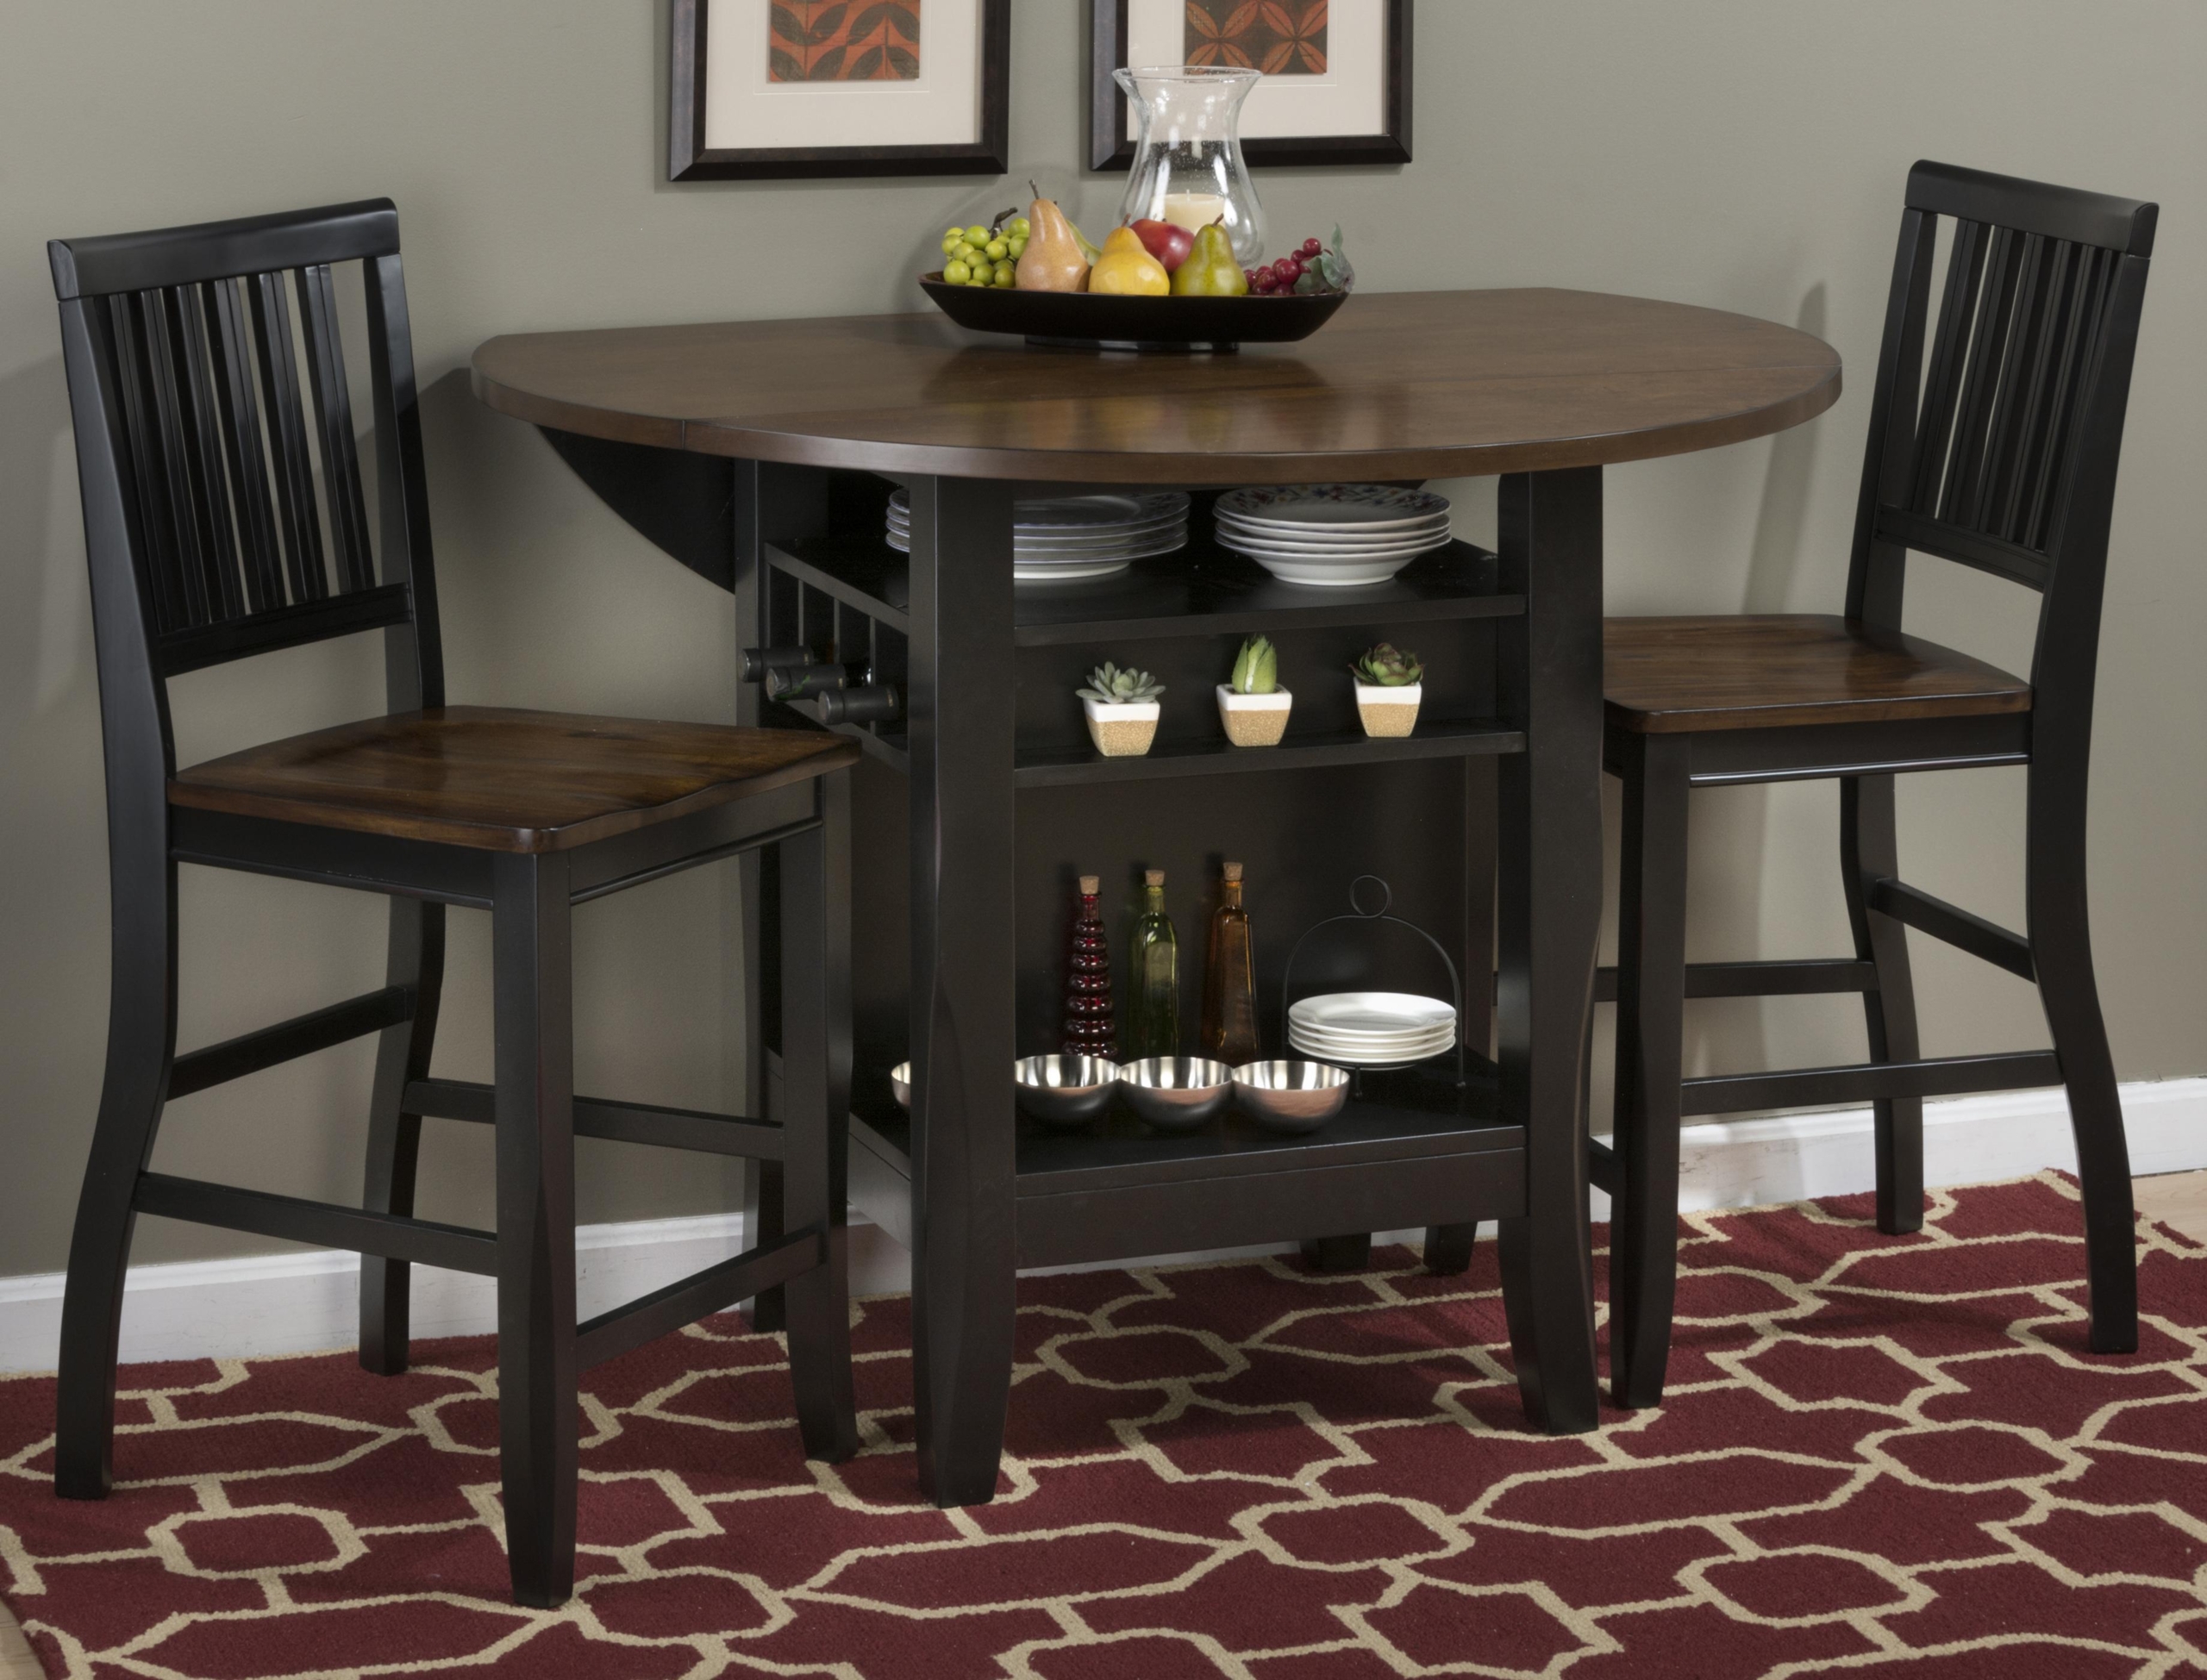 Counter height pedestal table